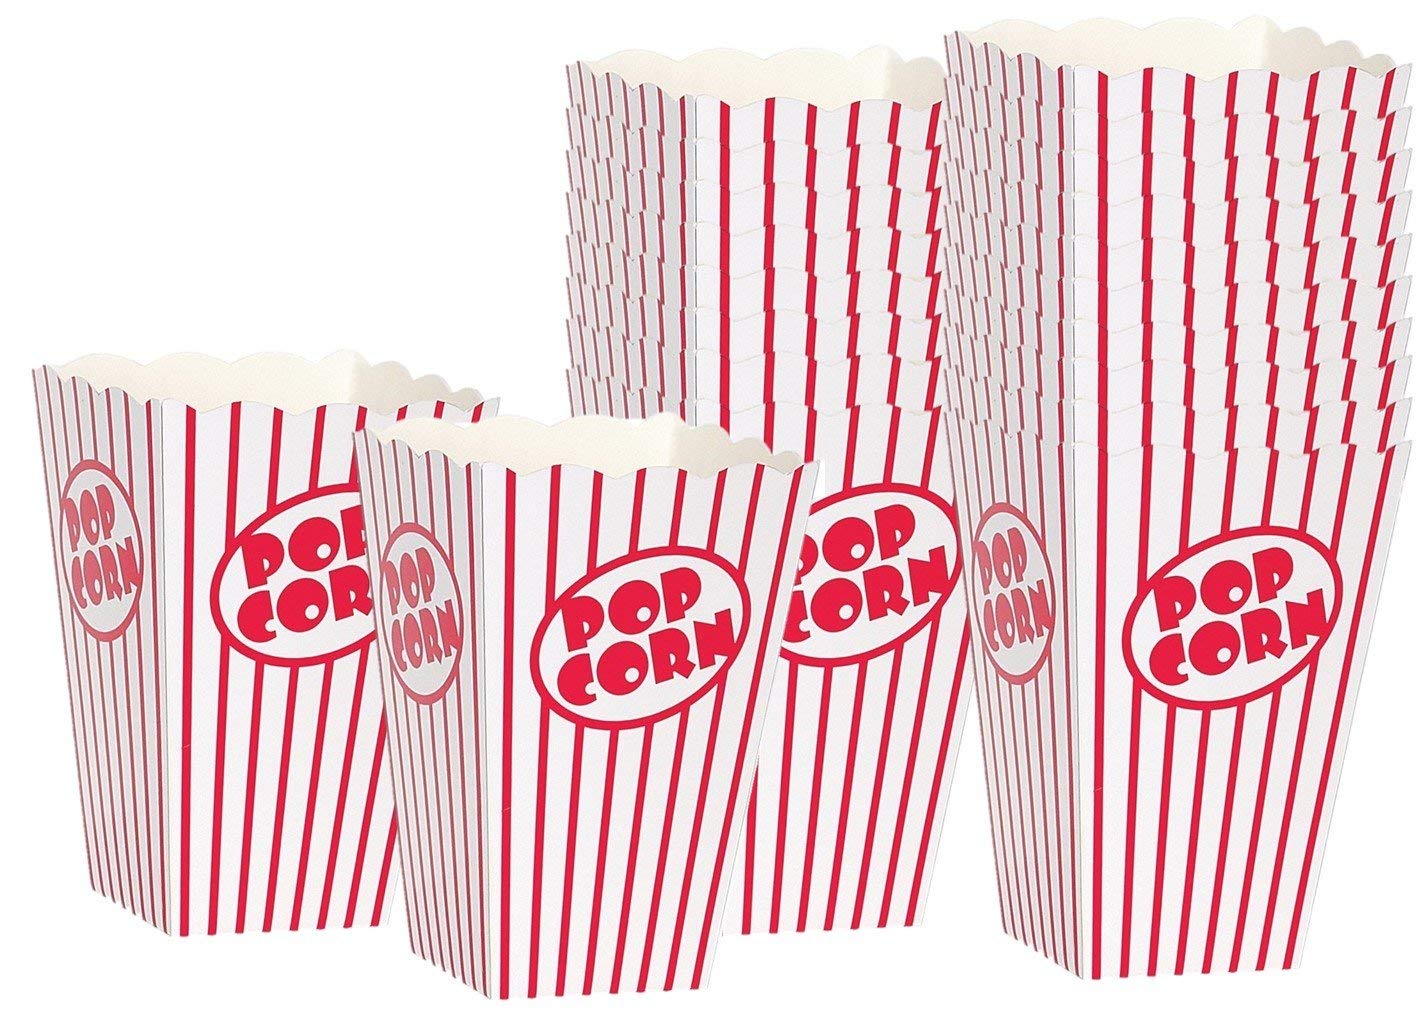 Kedudes Movie Night Popcorn Boxes for Party (20 pack) - Paper Popcorn Buckets -, Movie Theme Party Decorations, Movie Party Favors, Container, Carnival &#x26; Movie Night Supplies, Movie Party Decorations